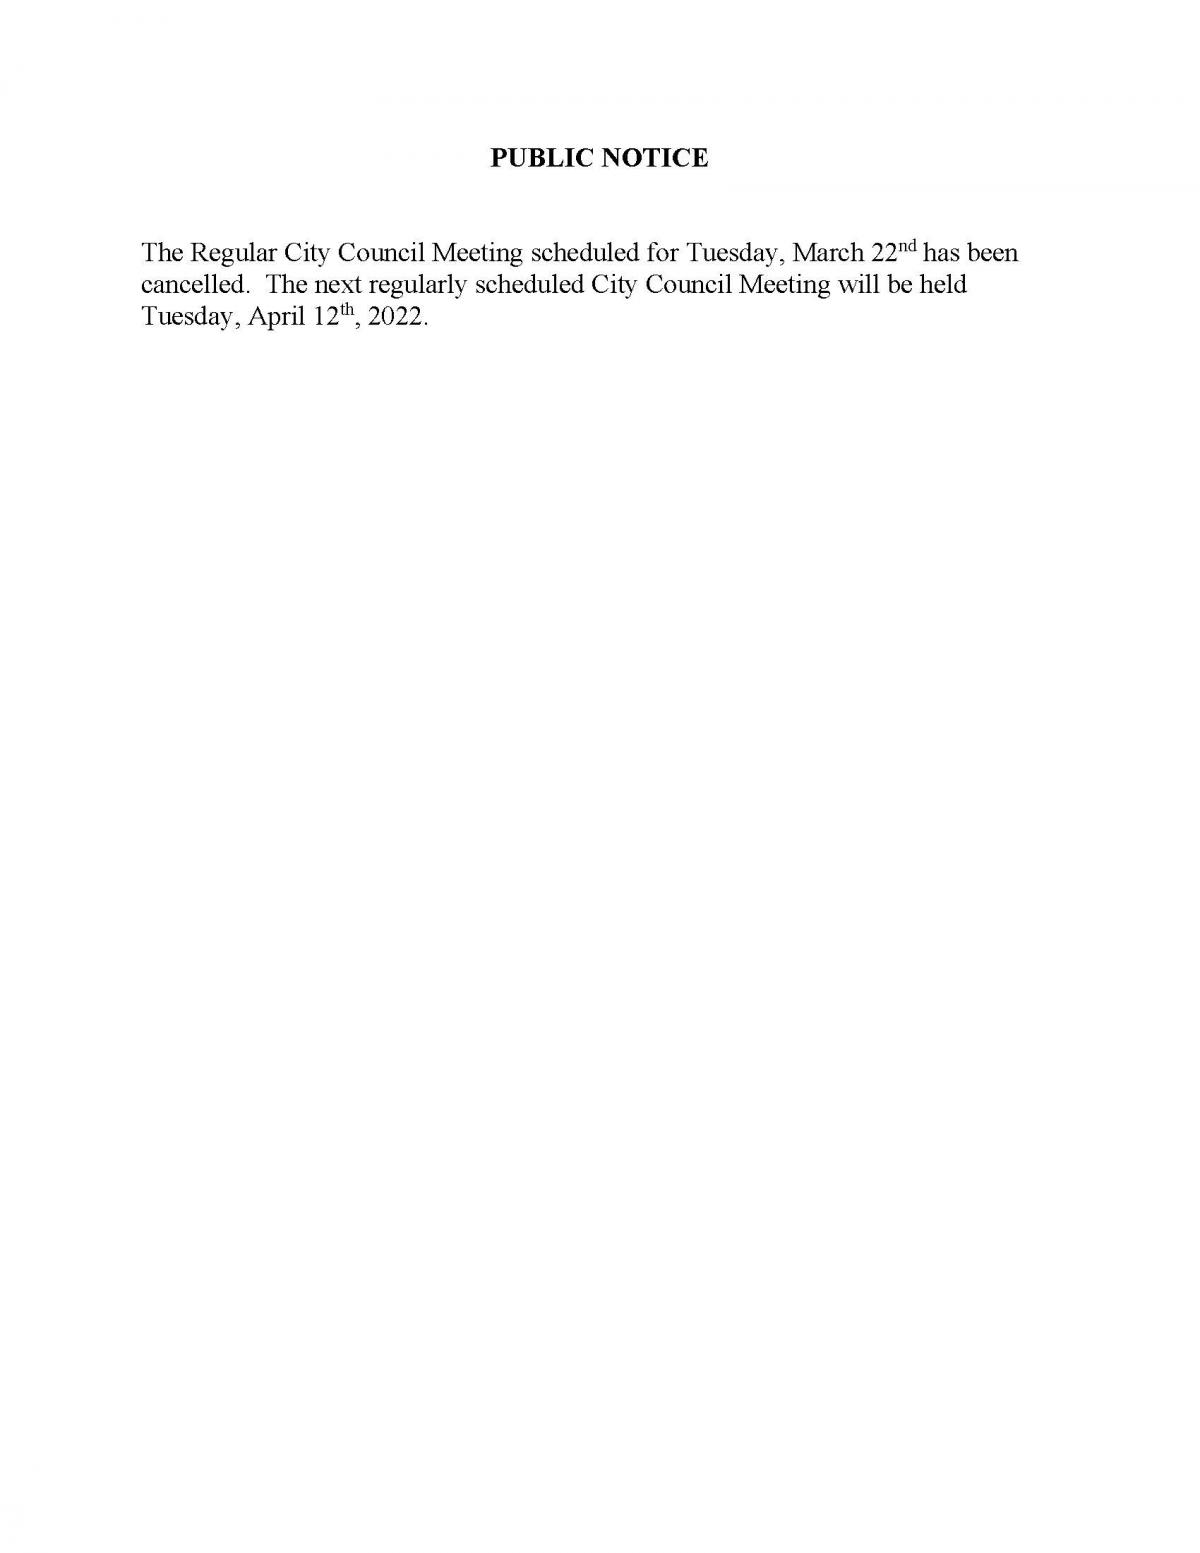 Public Notice - City Council Meeting 3-22-2022 - Cancelled